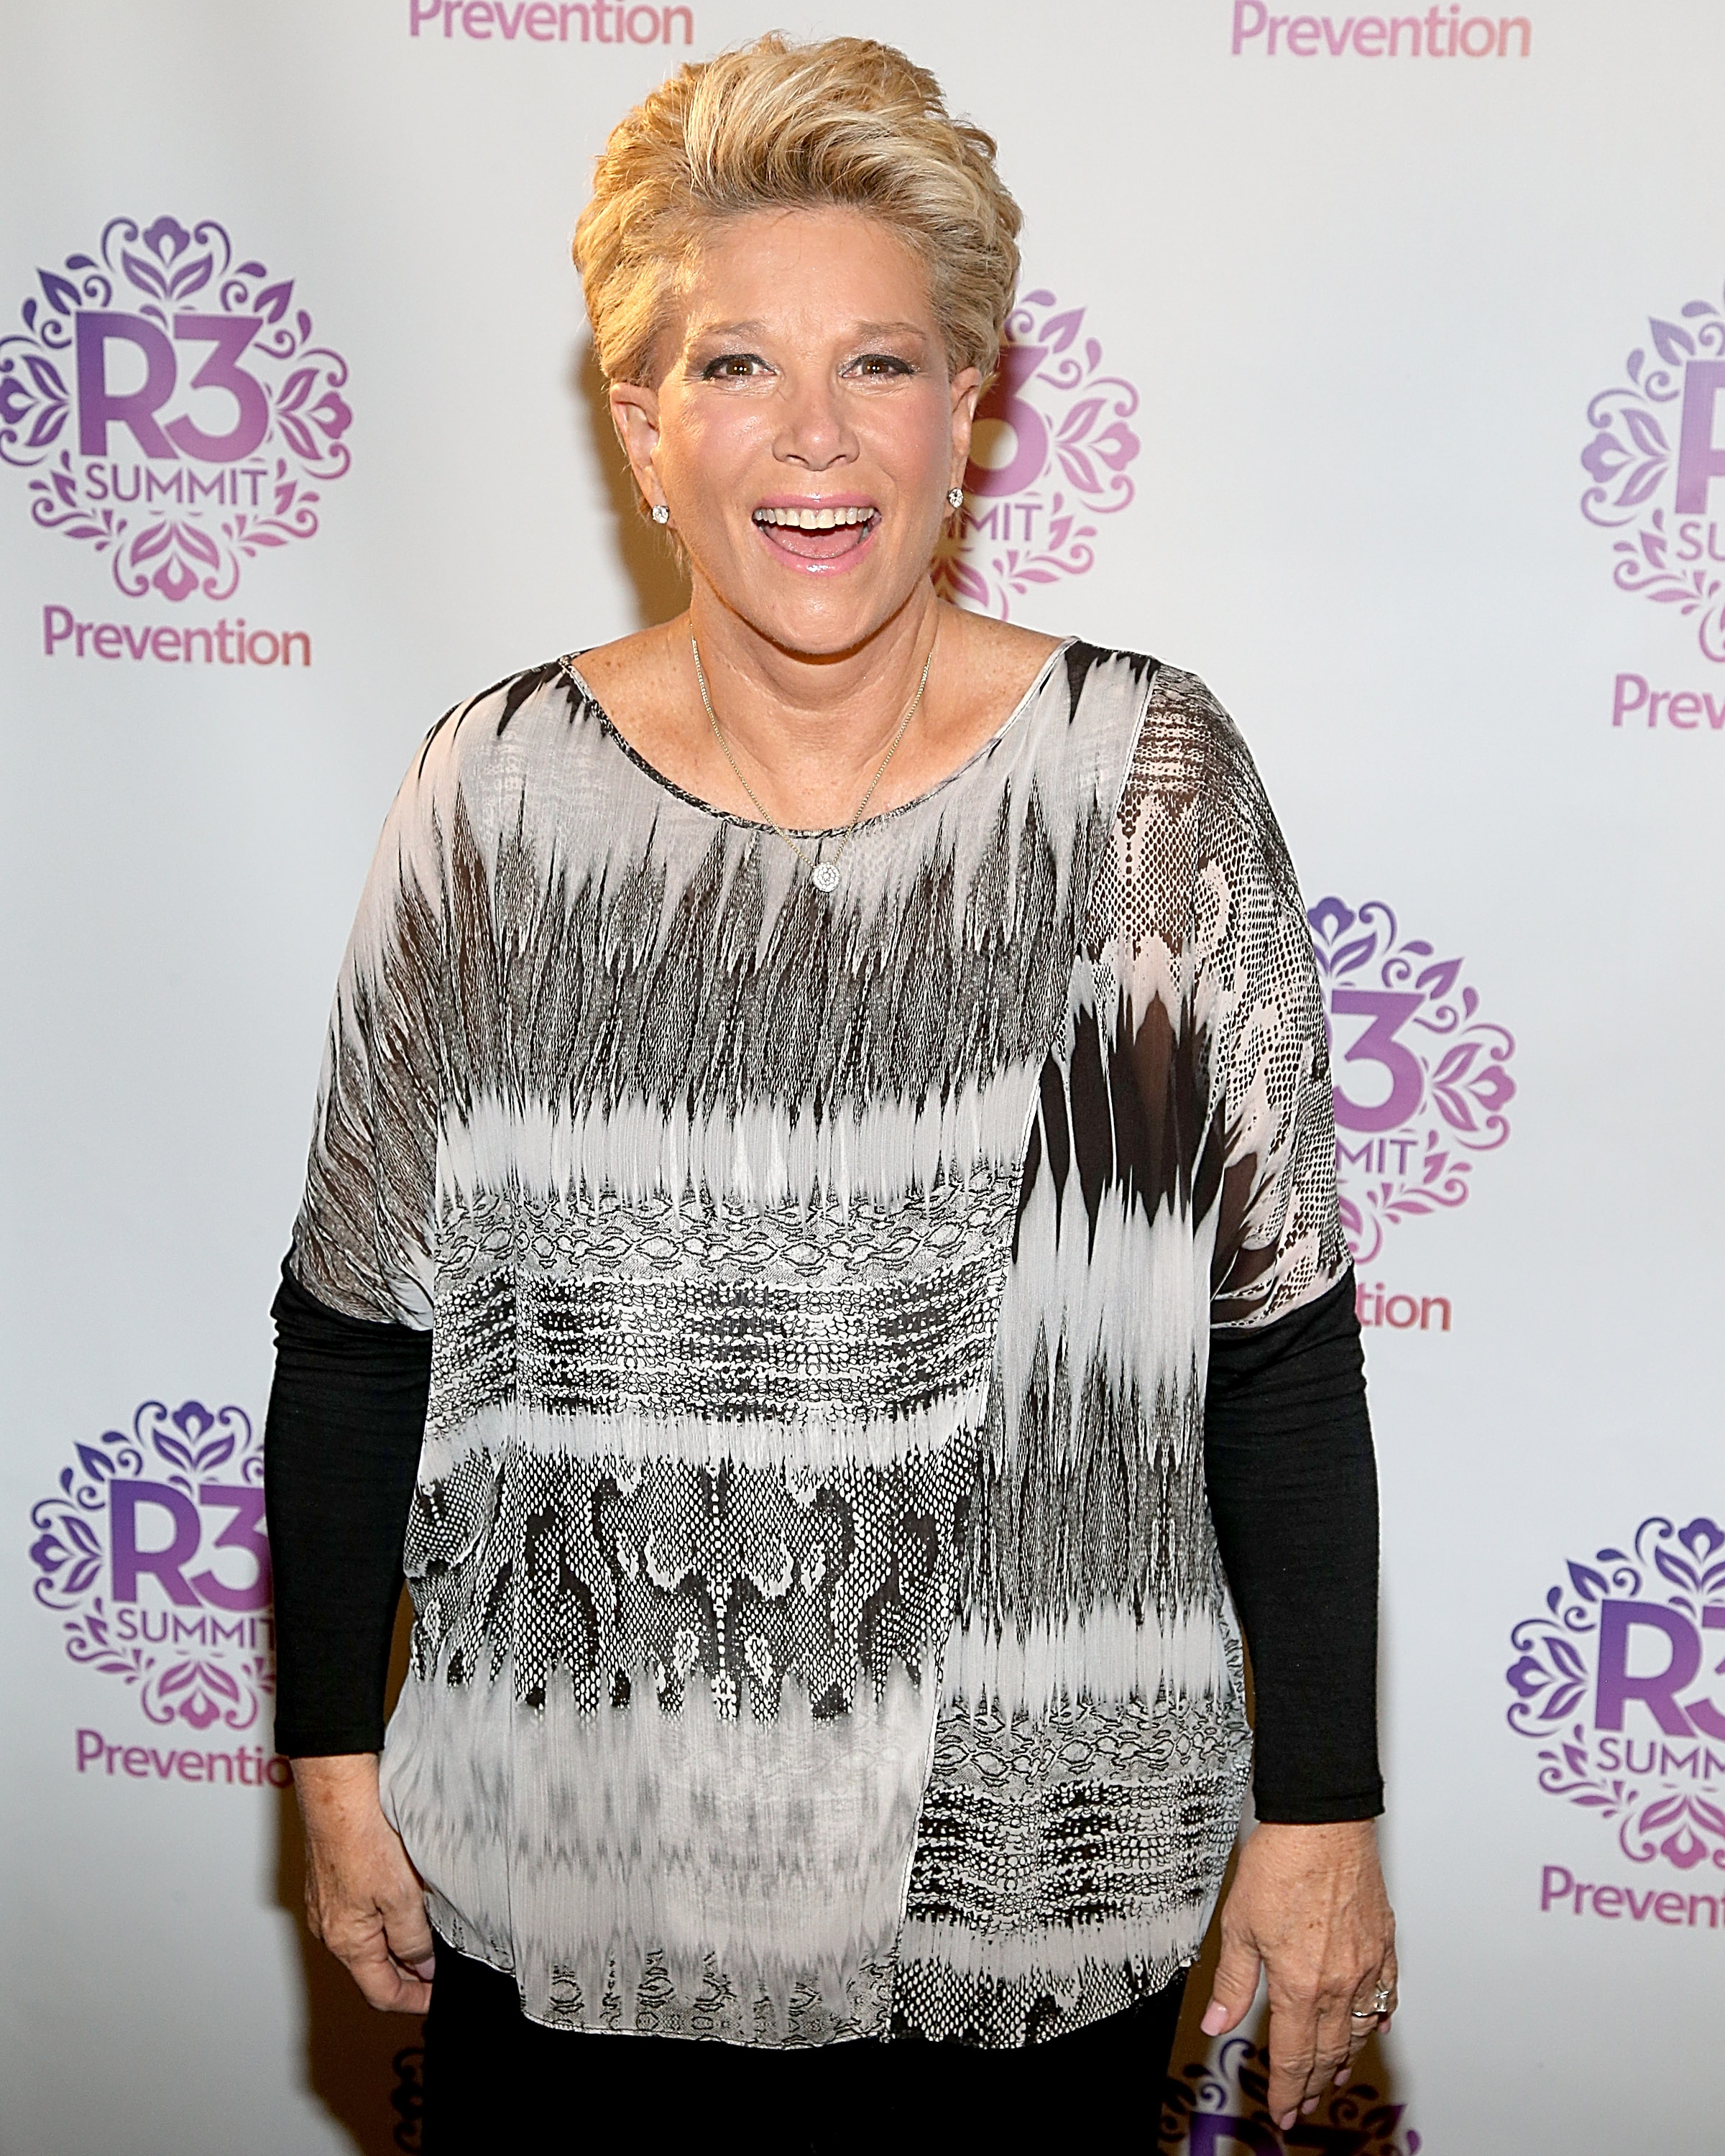 Joan Lunden at the 3rd annual R3 Summit hosted by Prevention Magazine at Acl Live at Moody Theatre in Austin, Texas on January 16, 2016. | Source: Getty Images